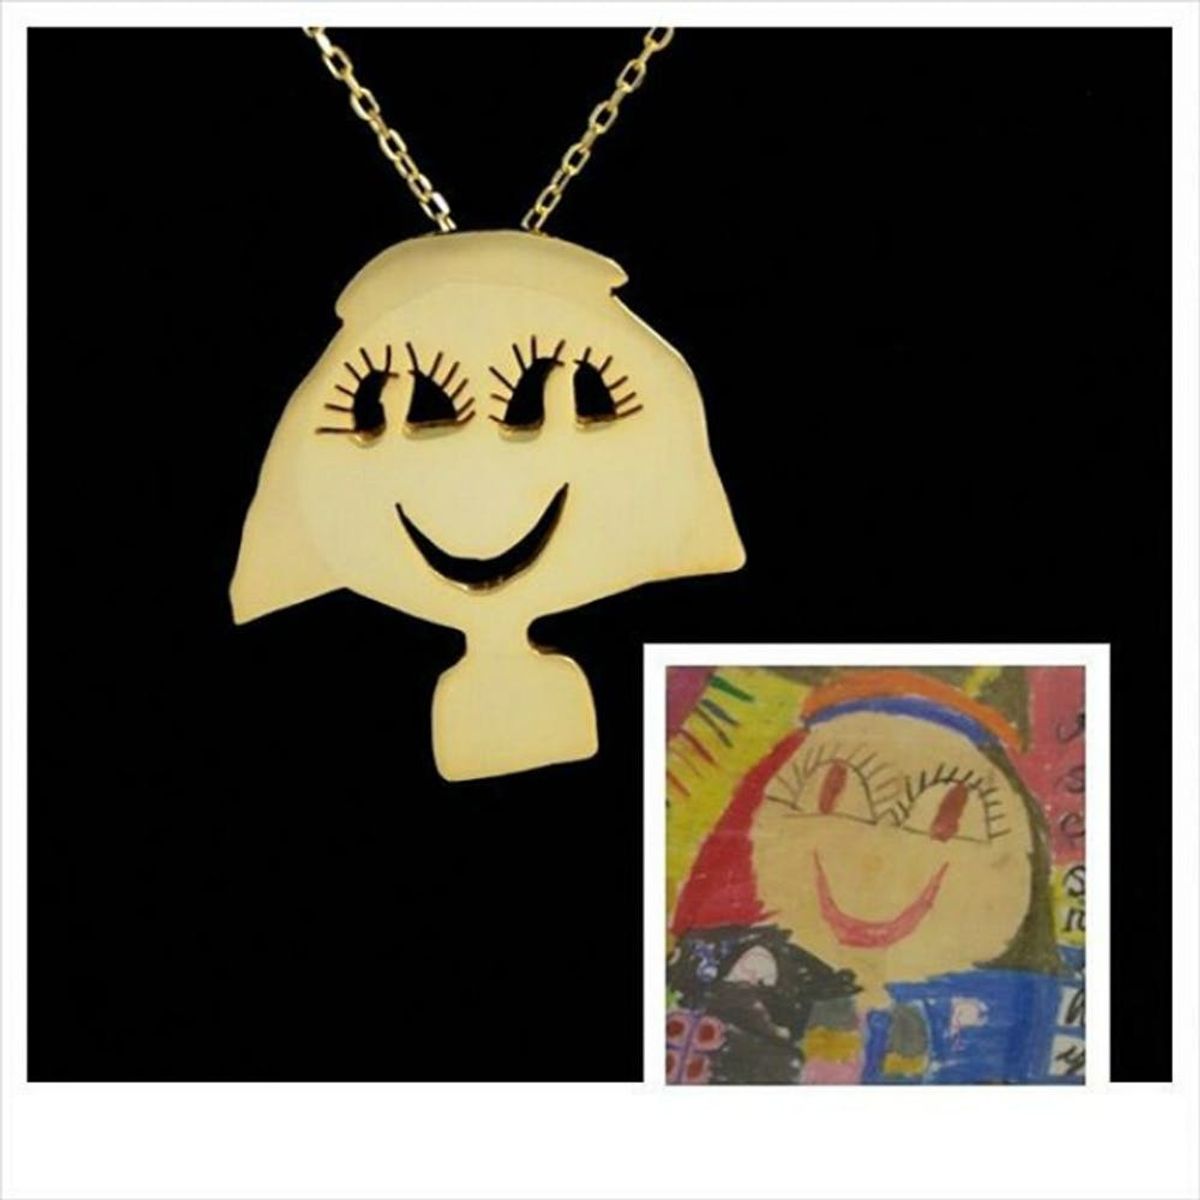 These Artists Turn Your Kids’ Creative Doodles into Beautiful Jewelry